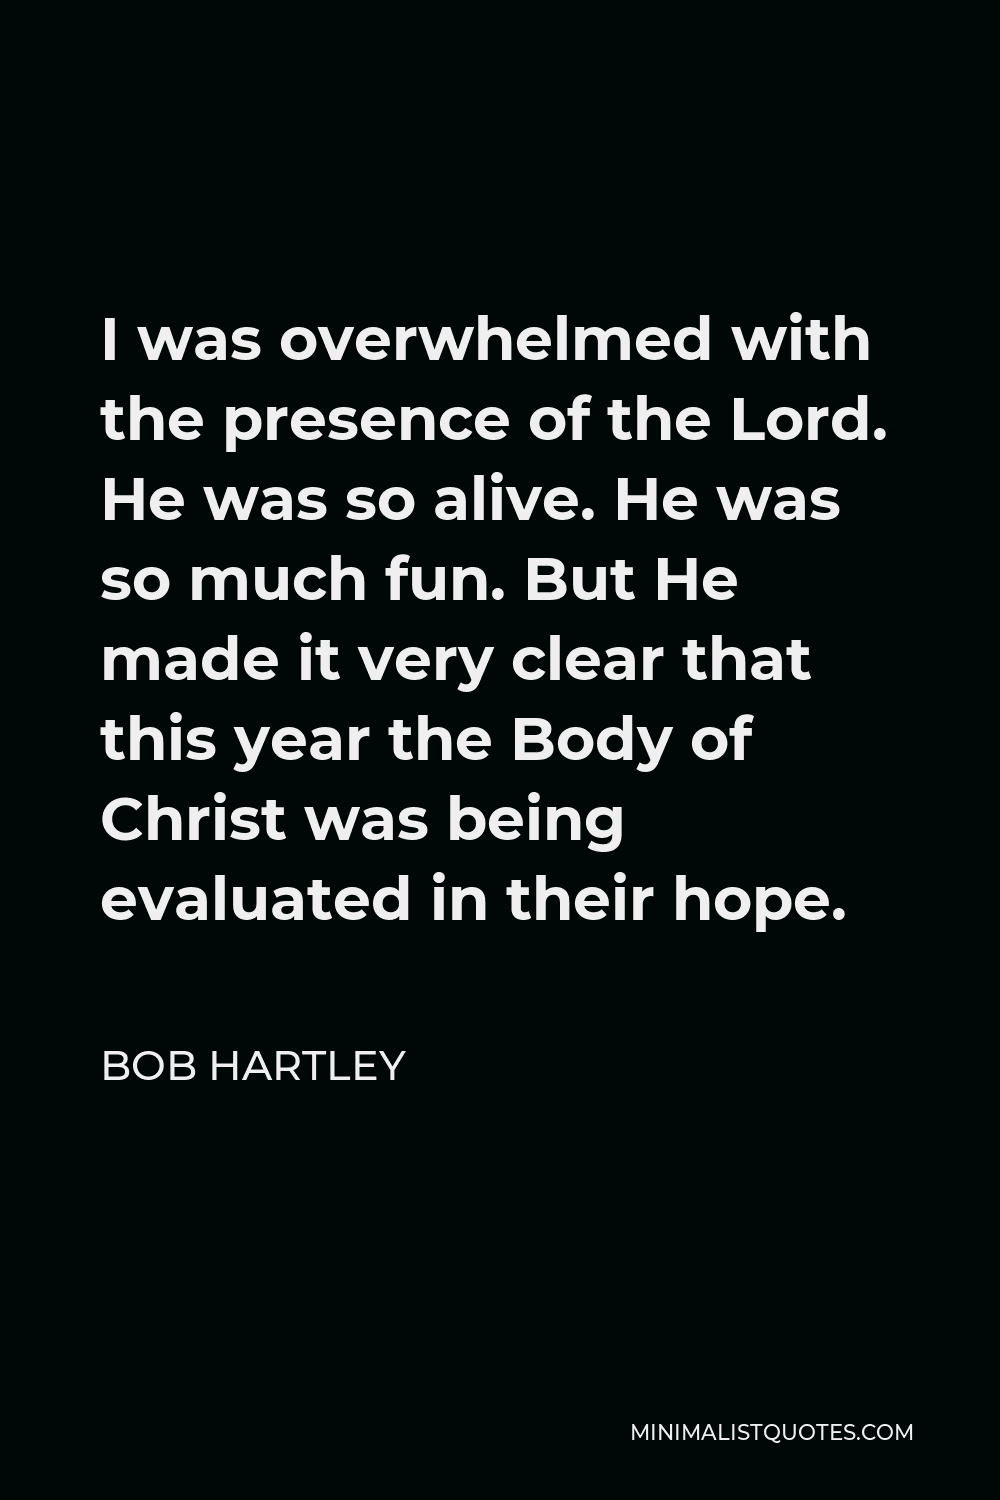 Bob Hartley Quote - I was overwhelmed with the presence of the Lord. He was so alive. He was so much fun. But He made it very clear that this year the Body of Christ was being evaluated in their hope.